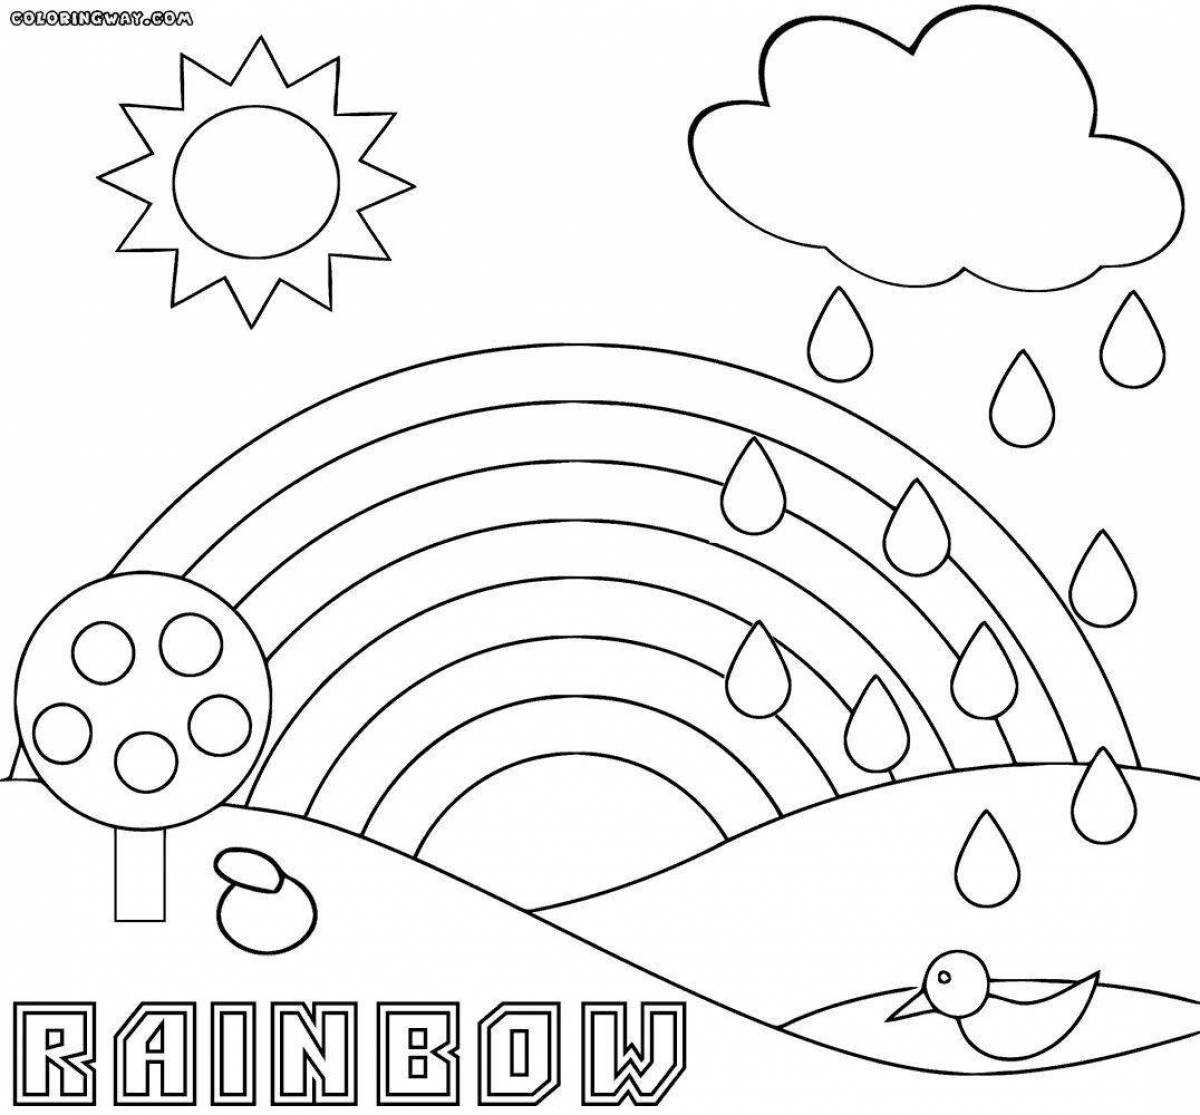 Live rainbow coloring for girls